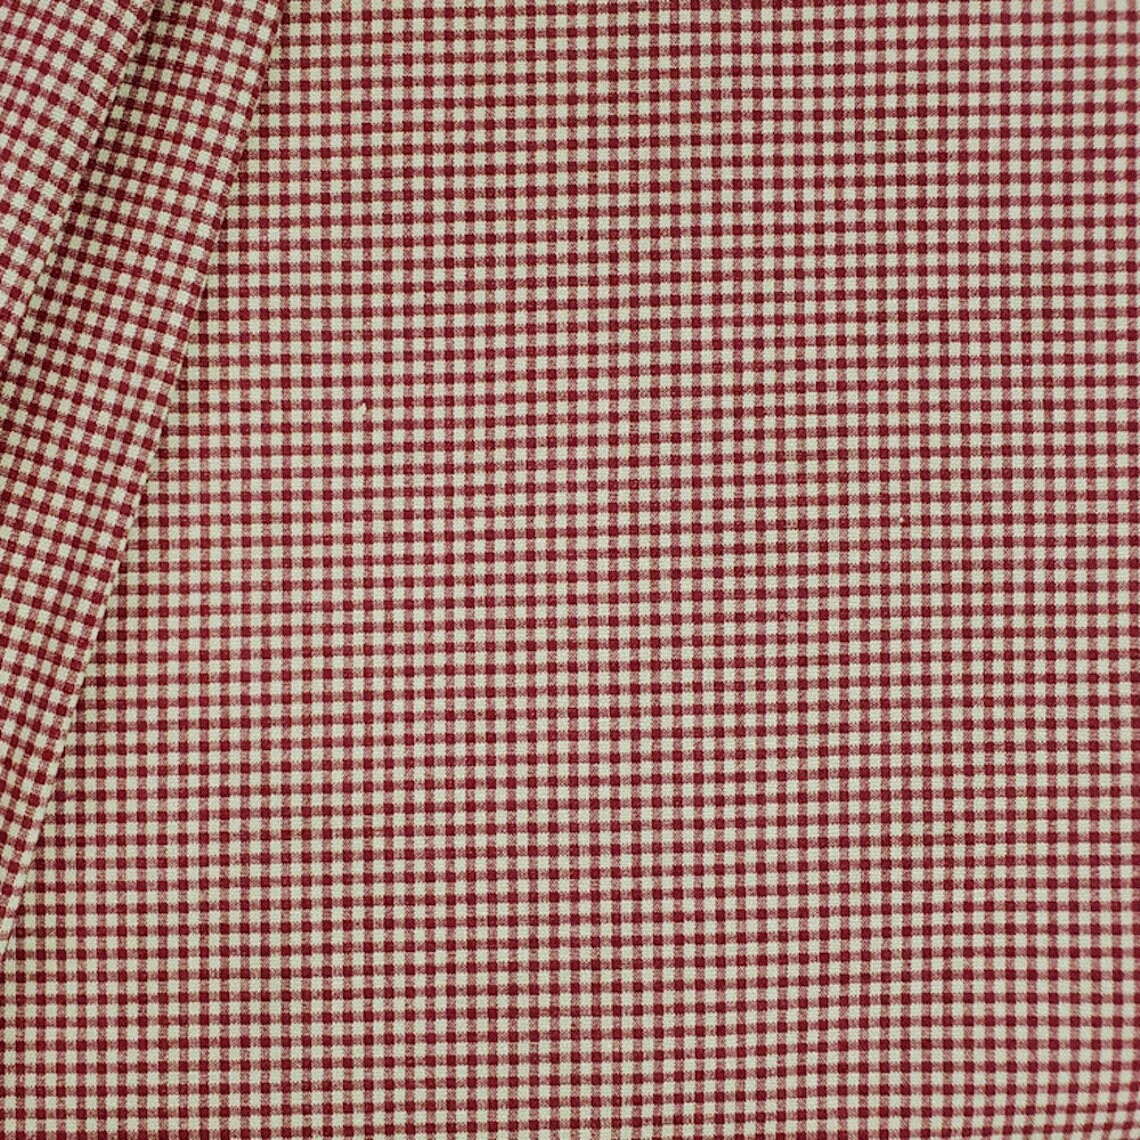 tie-up valance in farmhouse red gingham check on beige